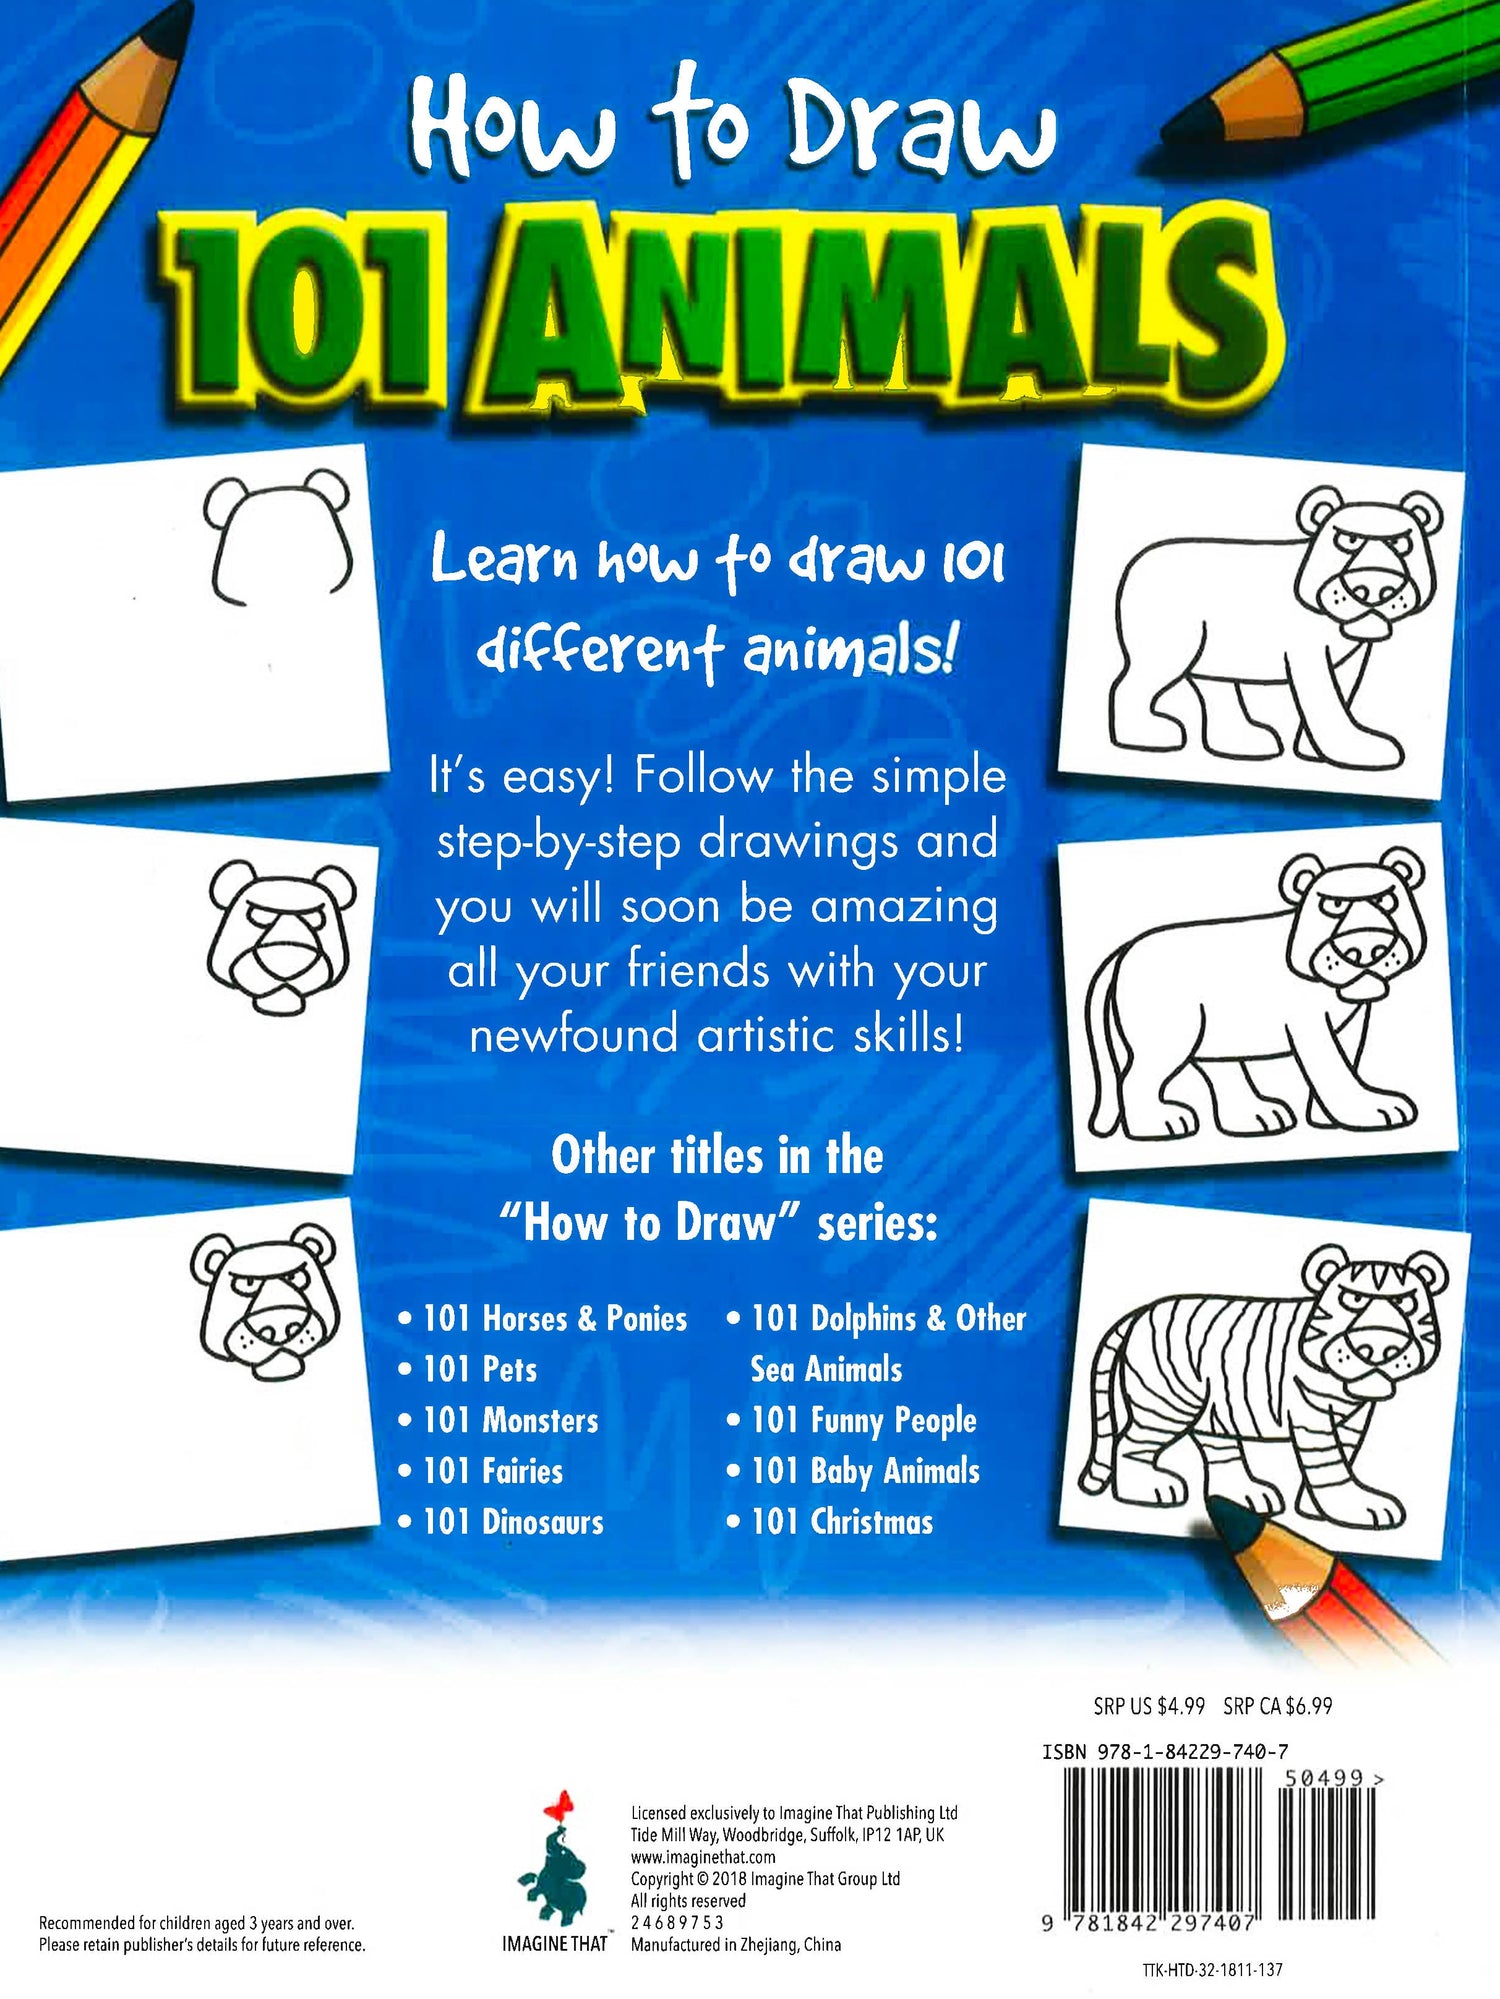 How To Draw 101 Animals BookXcess